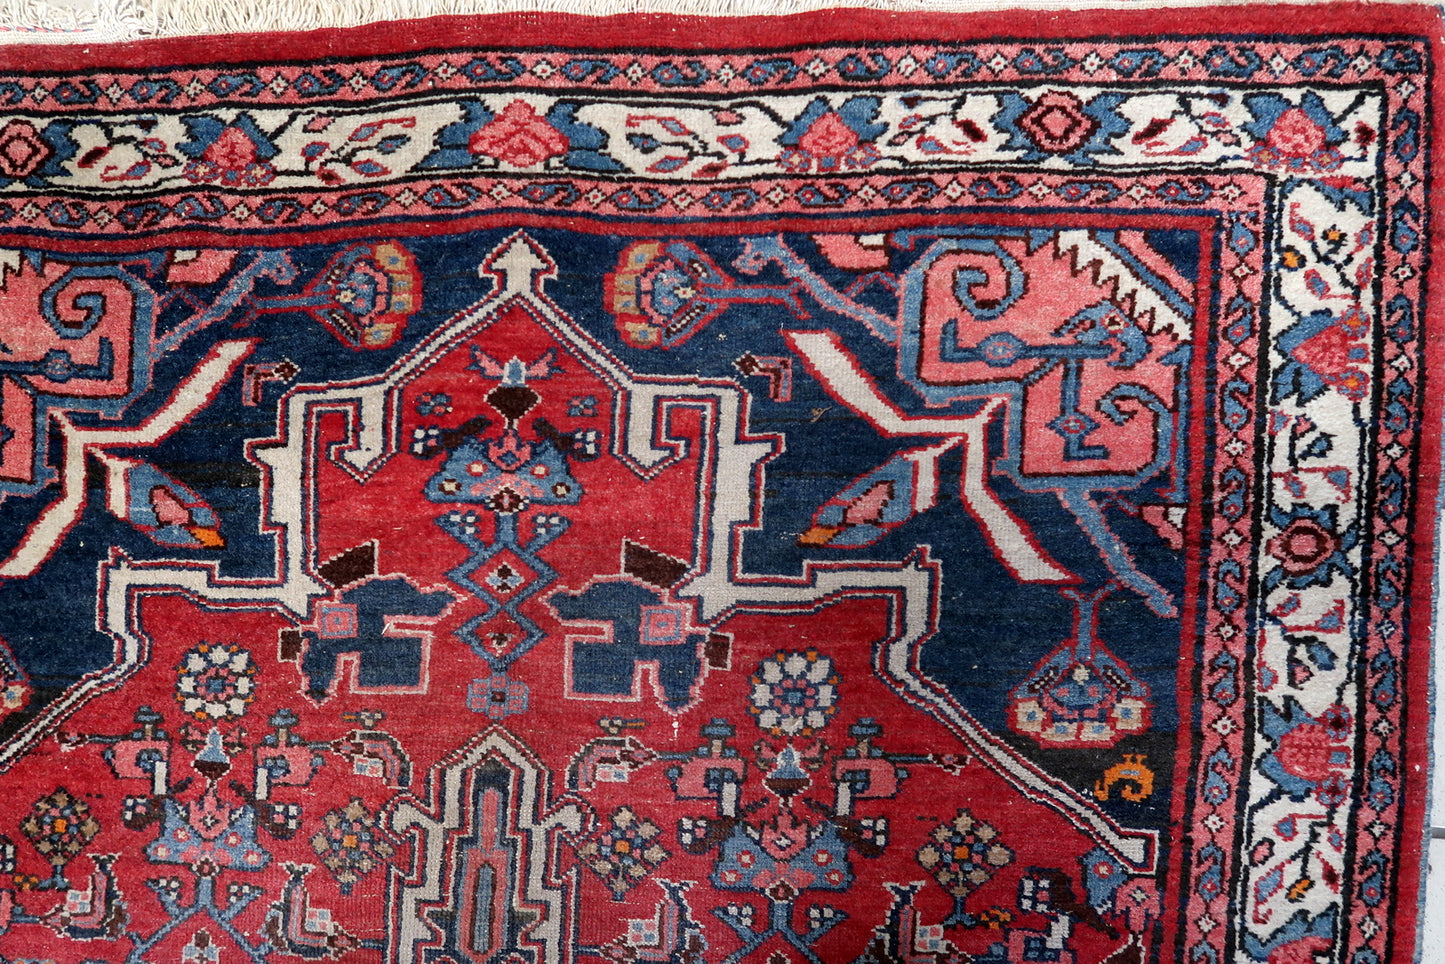 Close-up of central medallion on Handmade Vintage Persian Bidjar Rug - Detailed view showcasing the intricate central medallion surrounded by floral motifs.